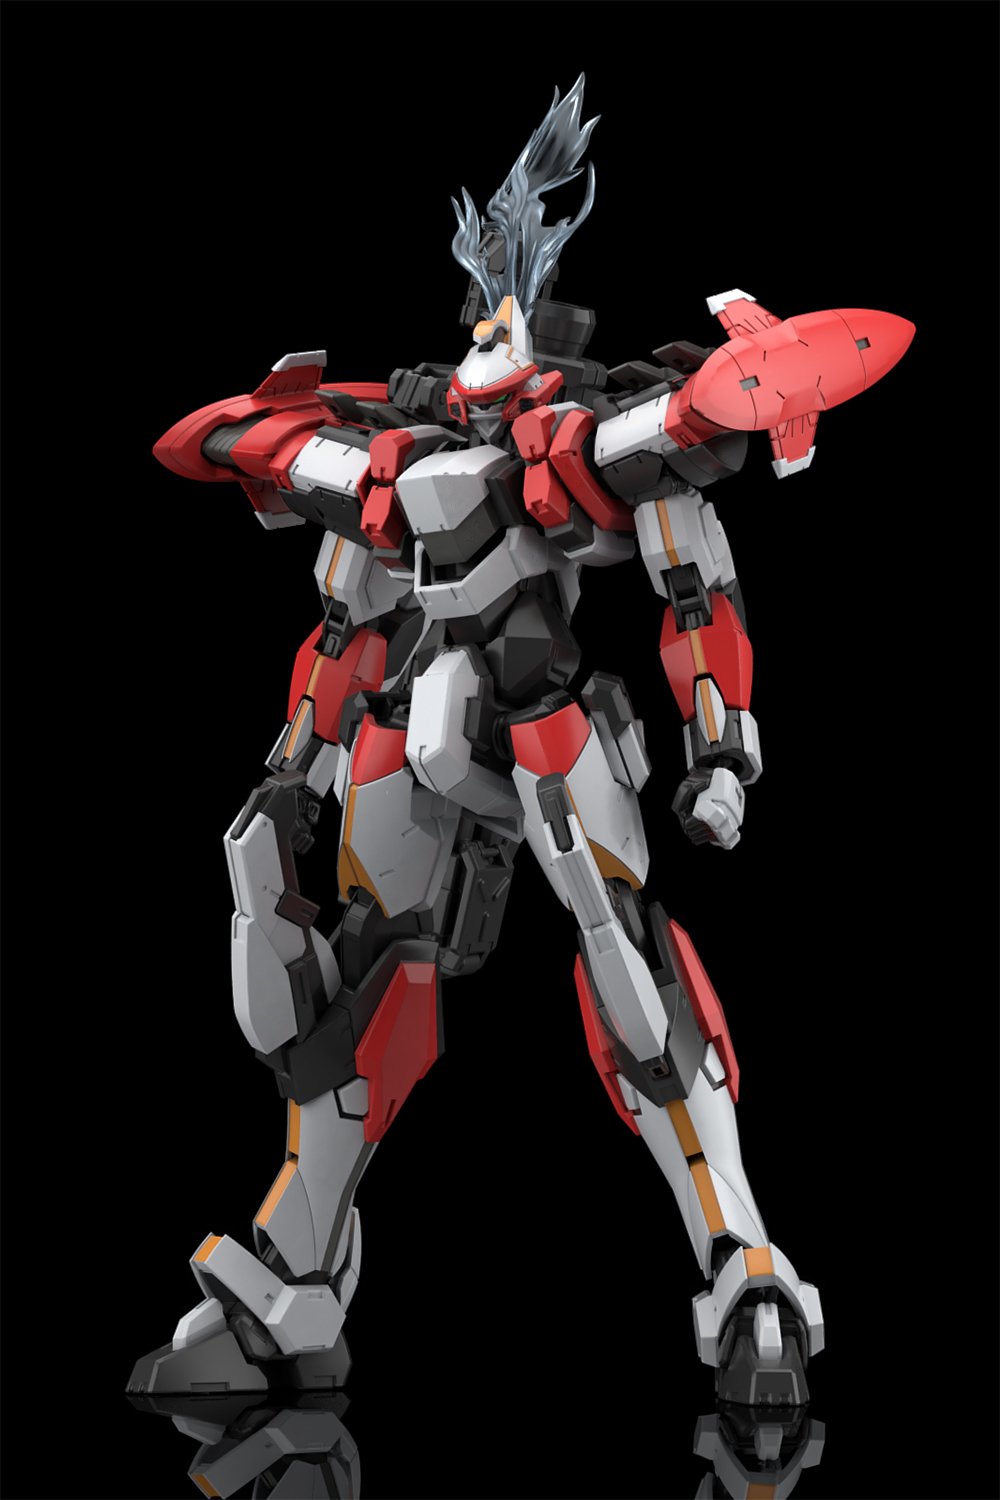 Aoshima - Full Metal Panic! Invisible Victory - ARX-8 Laevatein Final Battle Ver. Model Kit (1/48 Scale) - Marvelous Toys